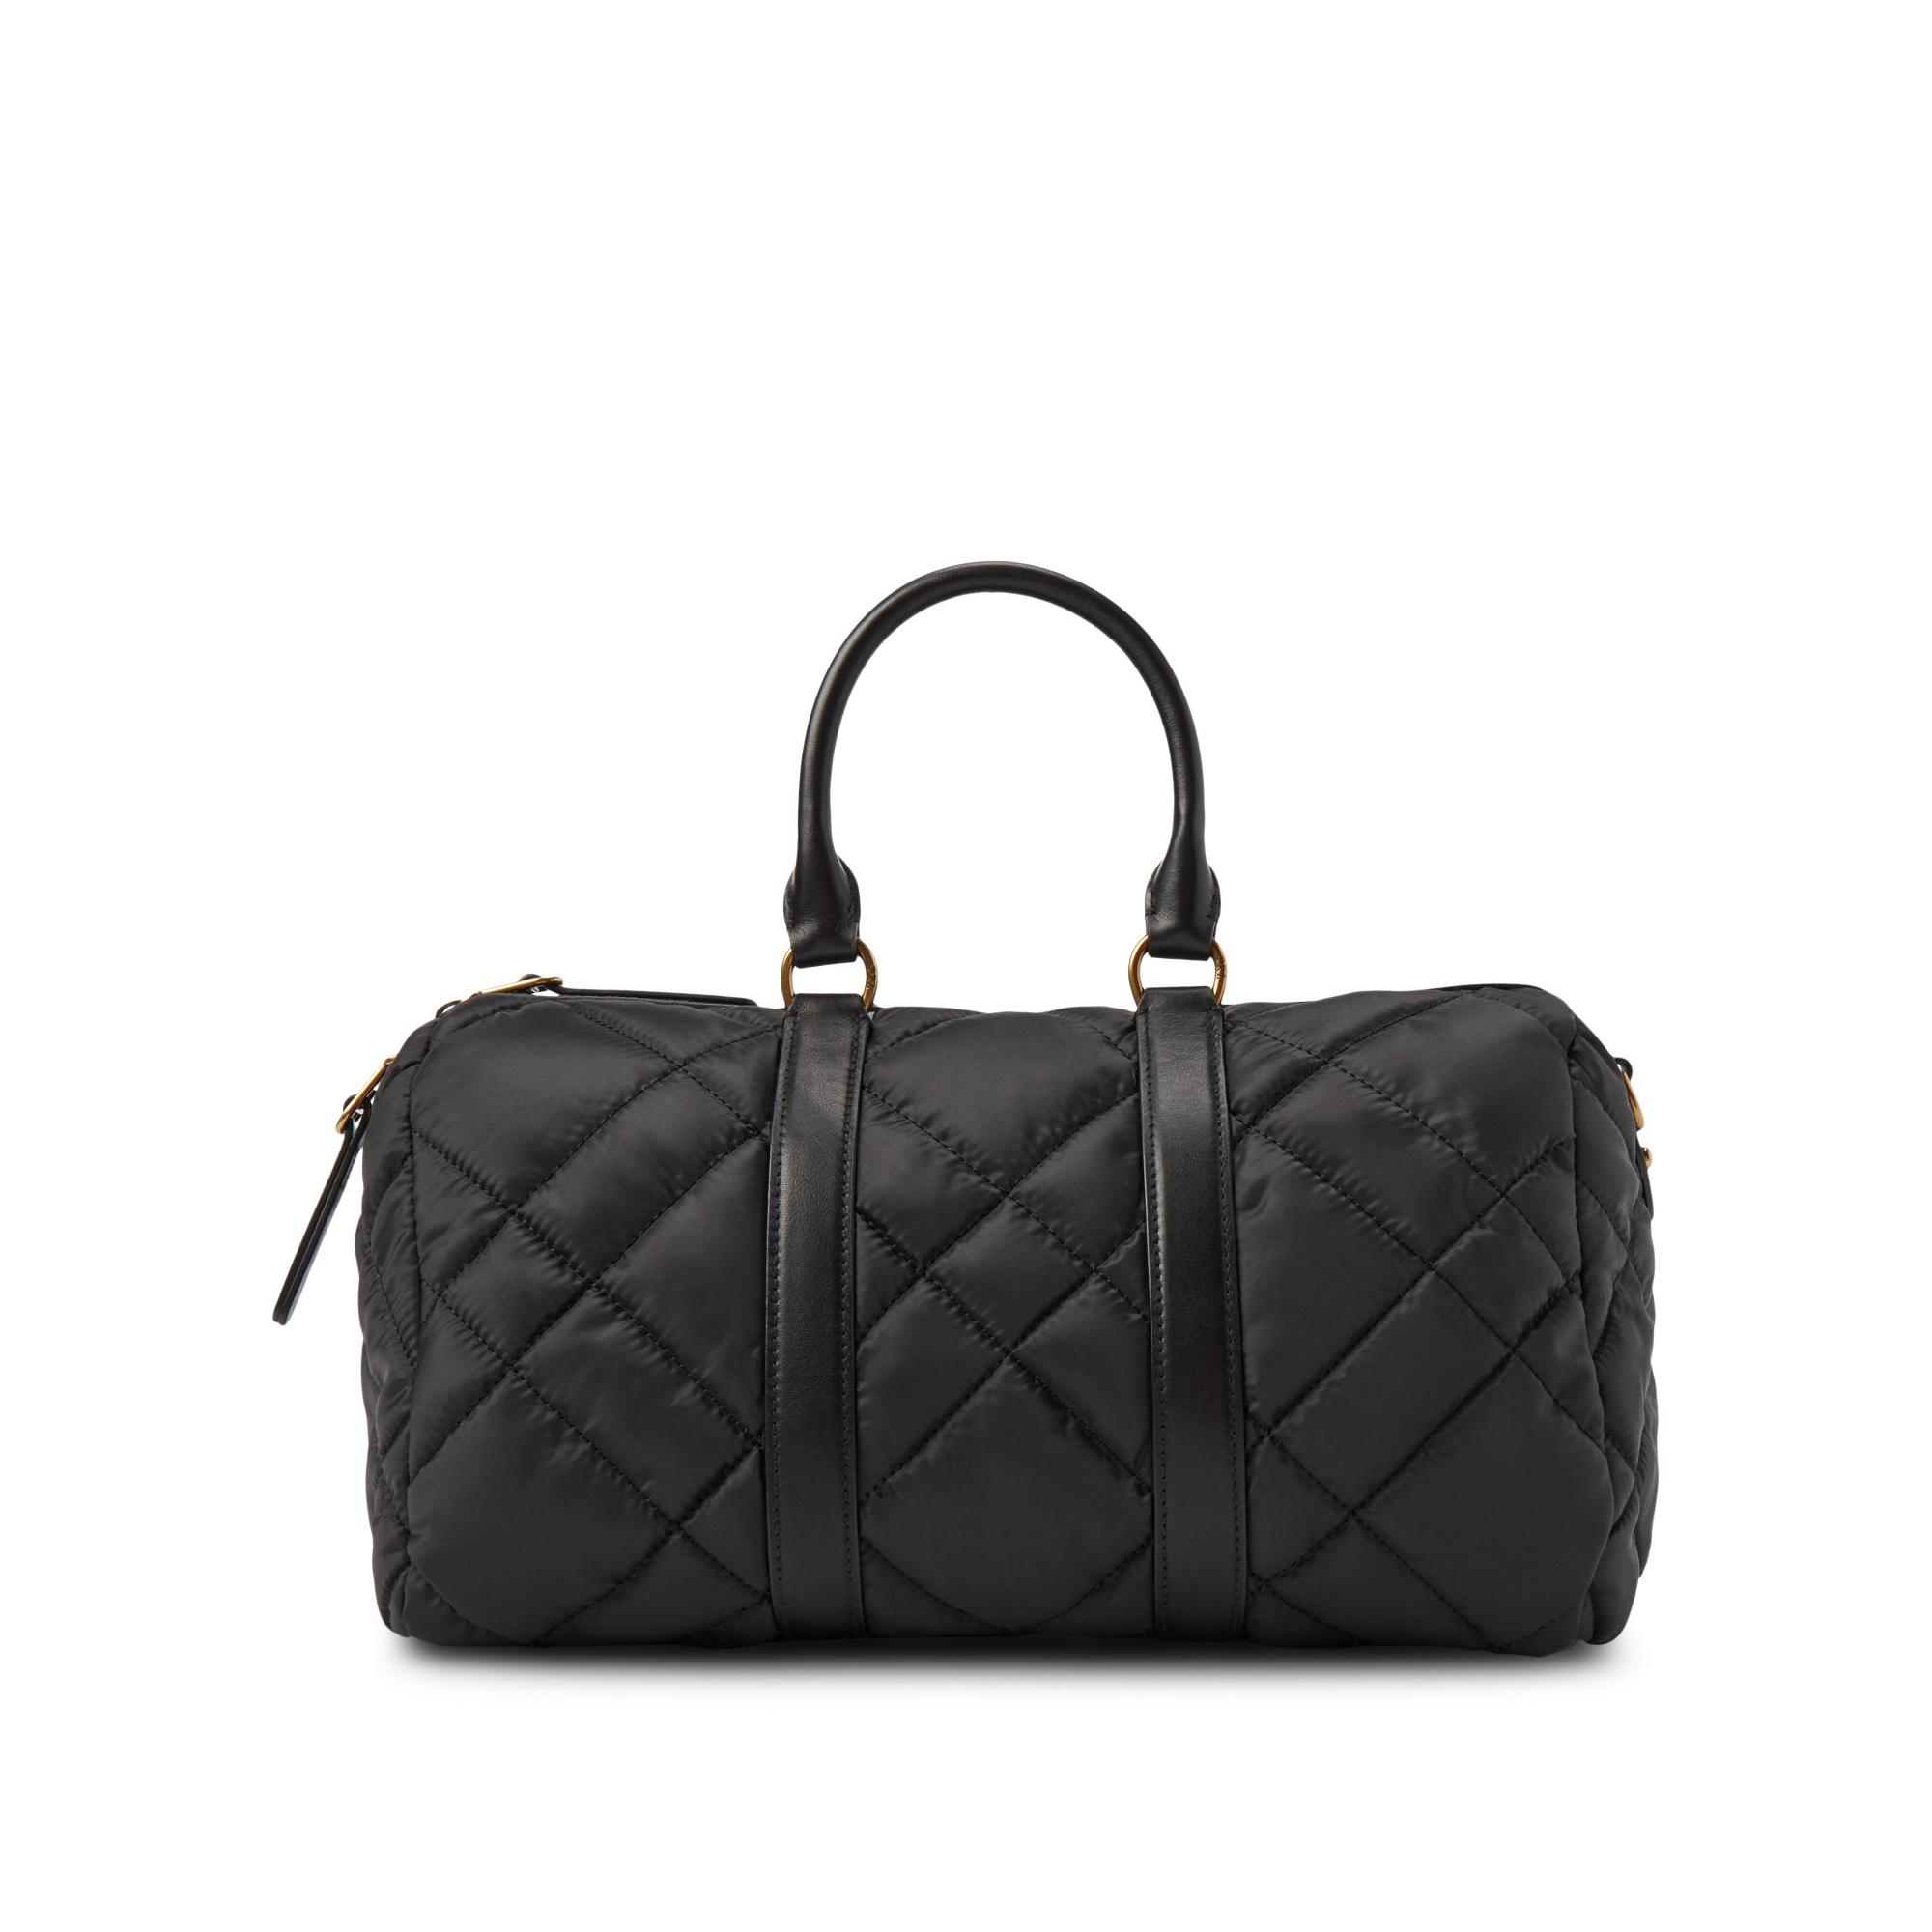 Chanel Vintage White Quilted Leather Black Logo Duffle Bag at 1stDibs